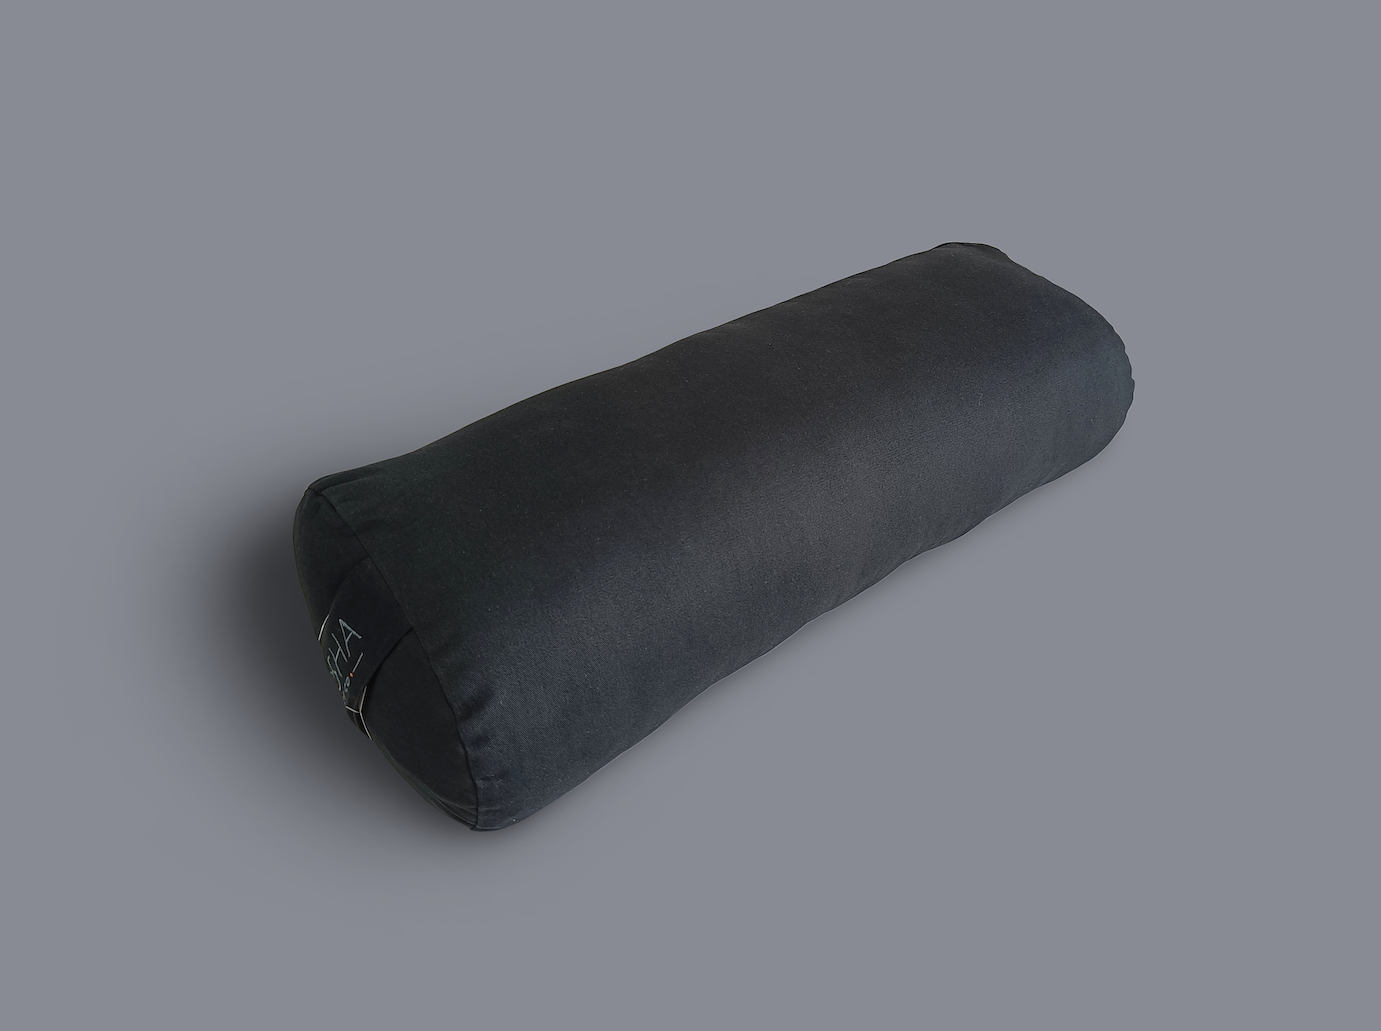 Yoga bolster with cotton cover with soft cushioning for yin yoga restorative yoga relaxation mindfulness meditation in black colour